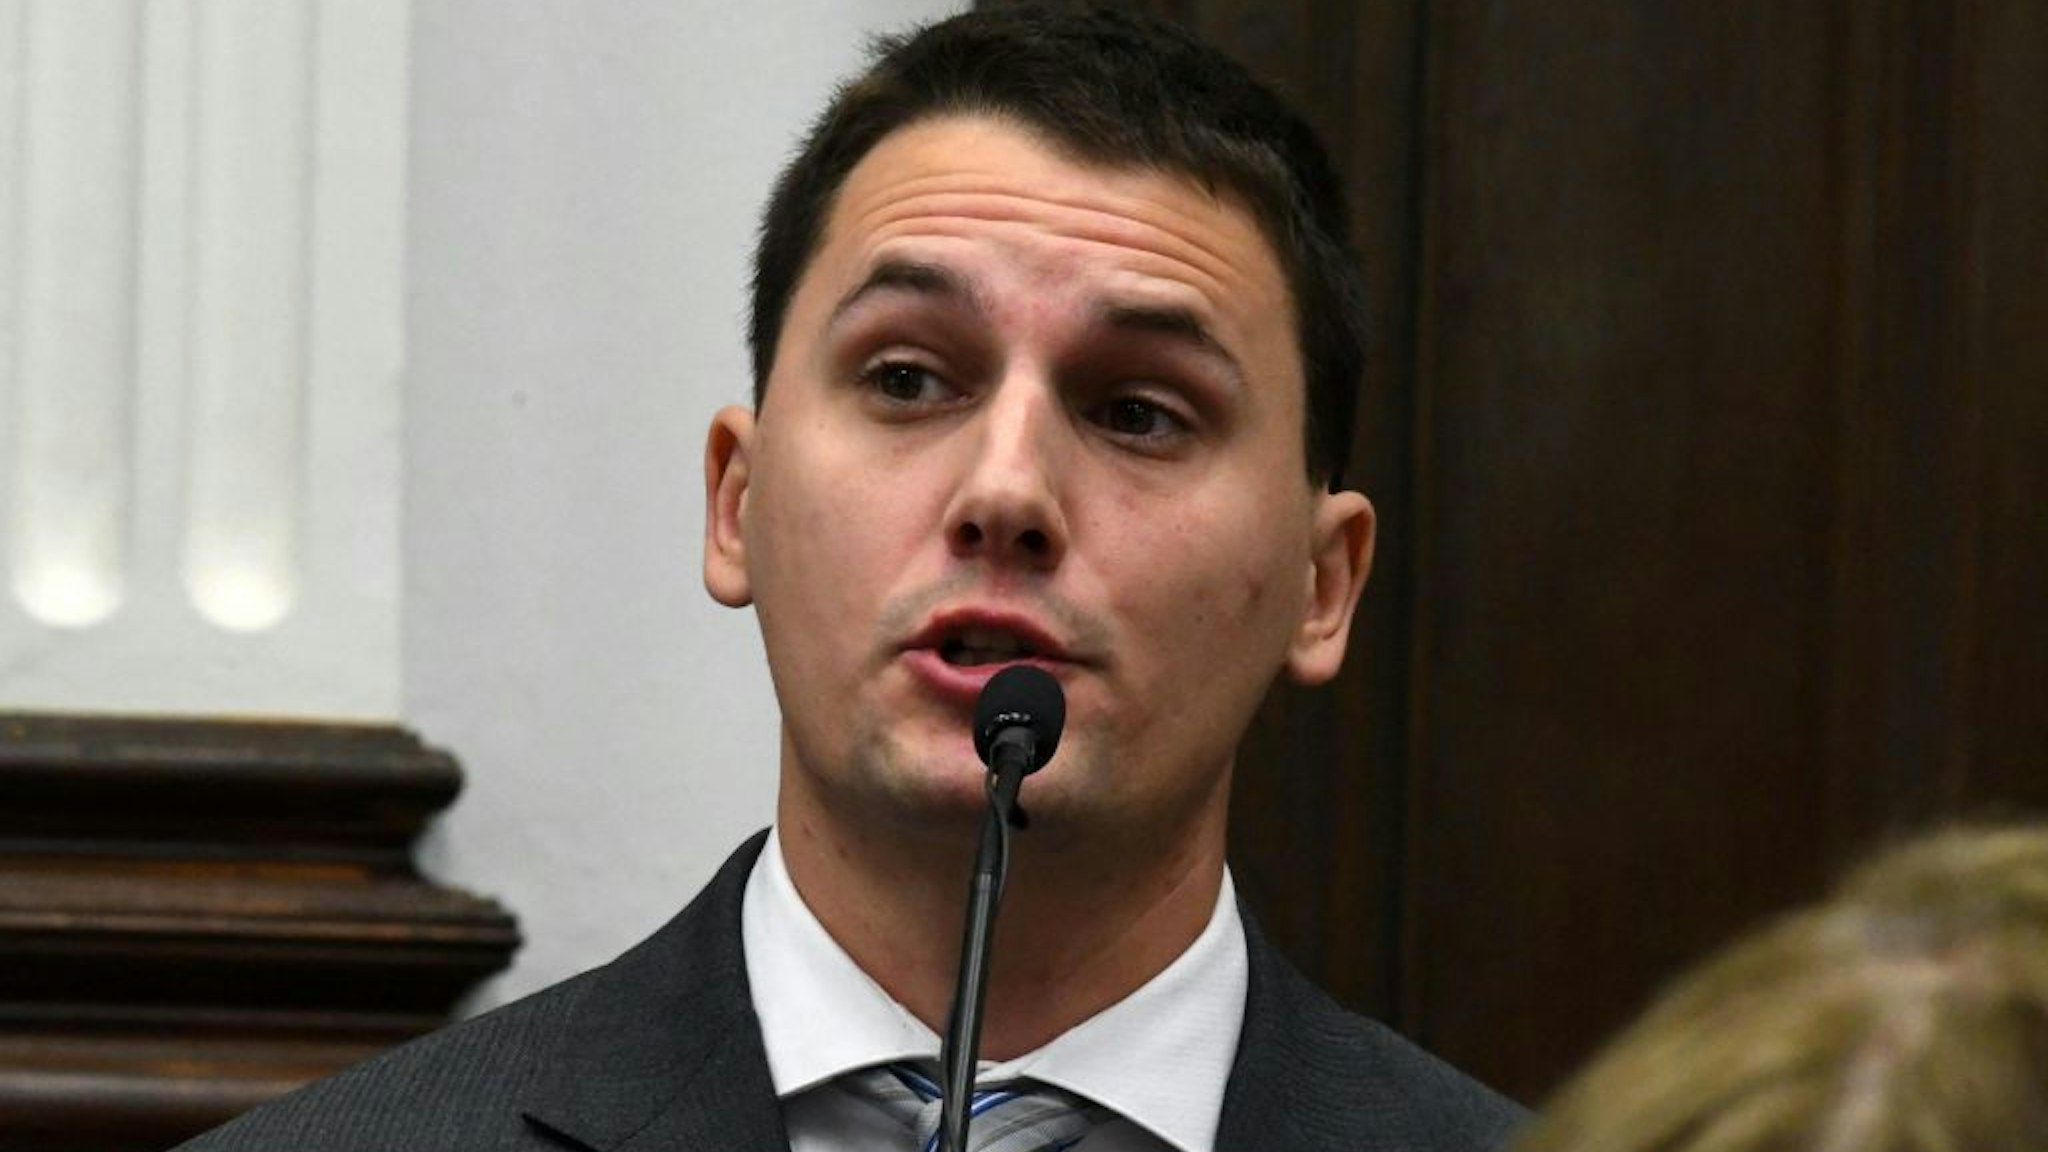 KENOSHA, WISCONSIN - NOVEMBER 05: Military veteran JASON LACKOWSKI testifies during the trial of Kyle Rittenhouse on November 5, 2021 in Kenosha, Wisconsin. Rittenhouse is accused of shooting three demonstrators, killing two of them, during a night of unrest that erupted in Kenosha after a police officer shot Jacob Blake seven times in the back while being arrested in August 2020. Rittenhouse, from Antioch, Illinois, was 17 at the time of the shooting and armed with an assault rifle. He faces counts of felony homicide and felony attempted homicide. (Photo by Mark Hertzberg-Pool/Getty Images)